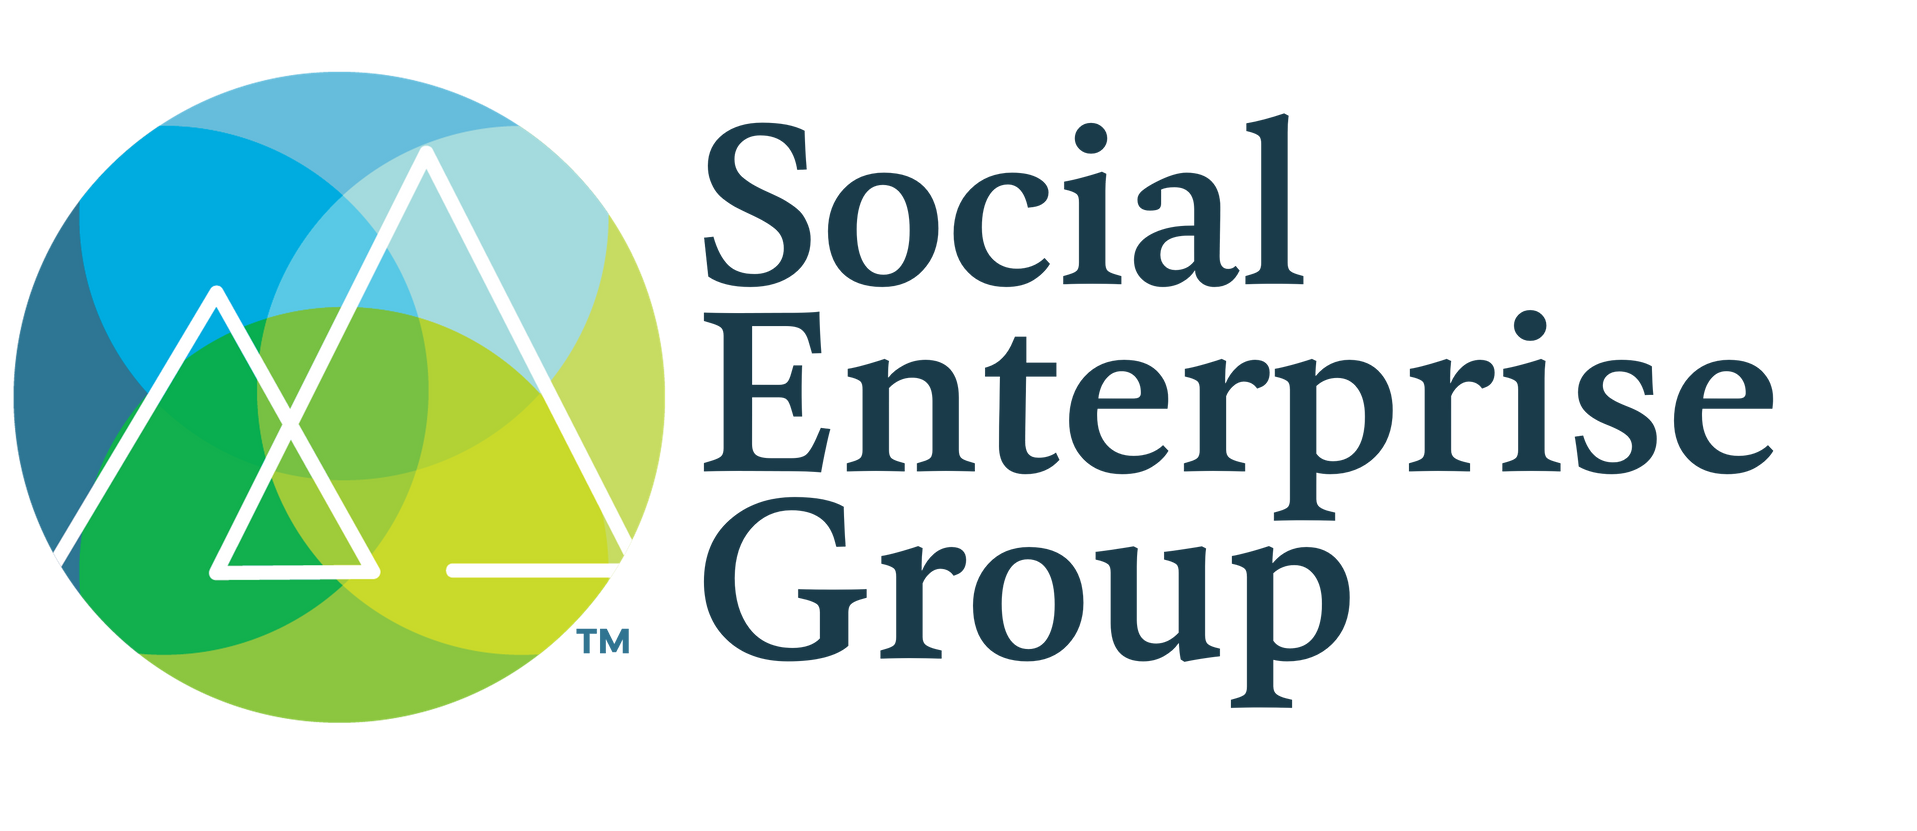 Social Enterprise Group – Helping Organizations Grow and Thrive